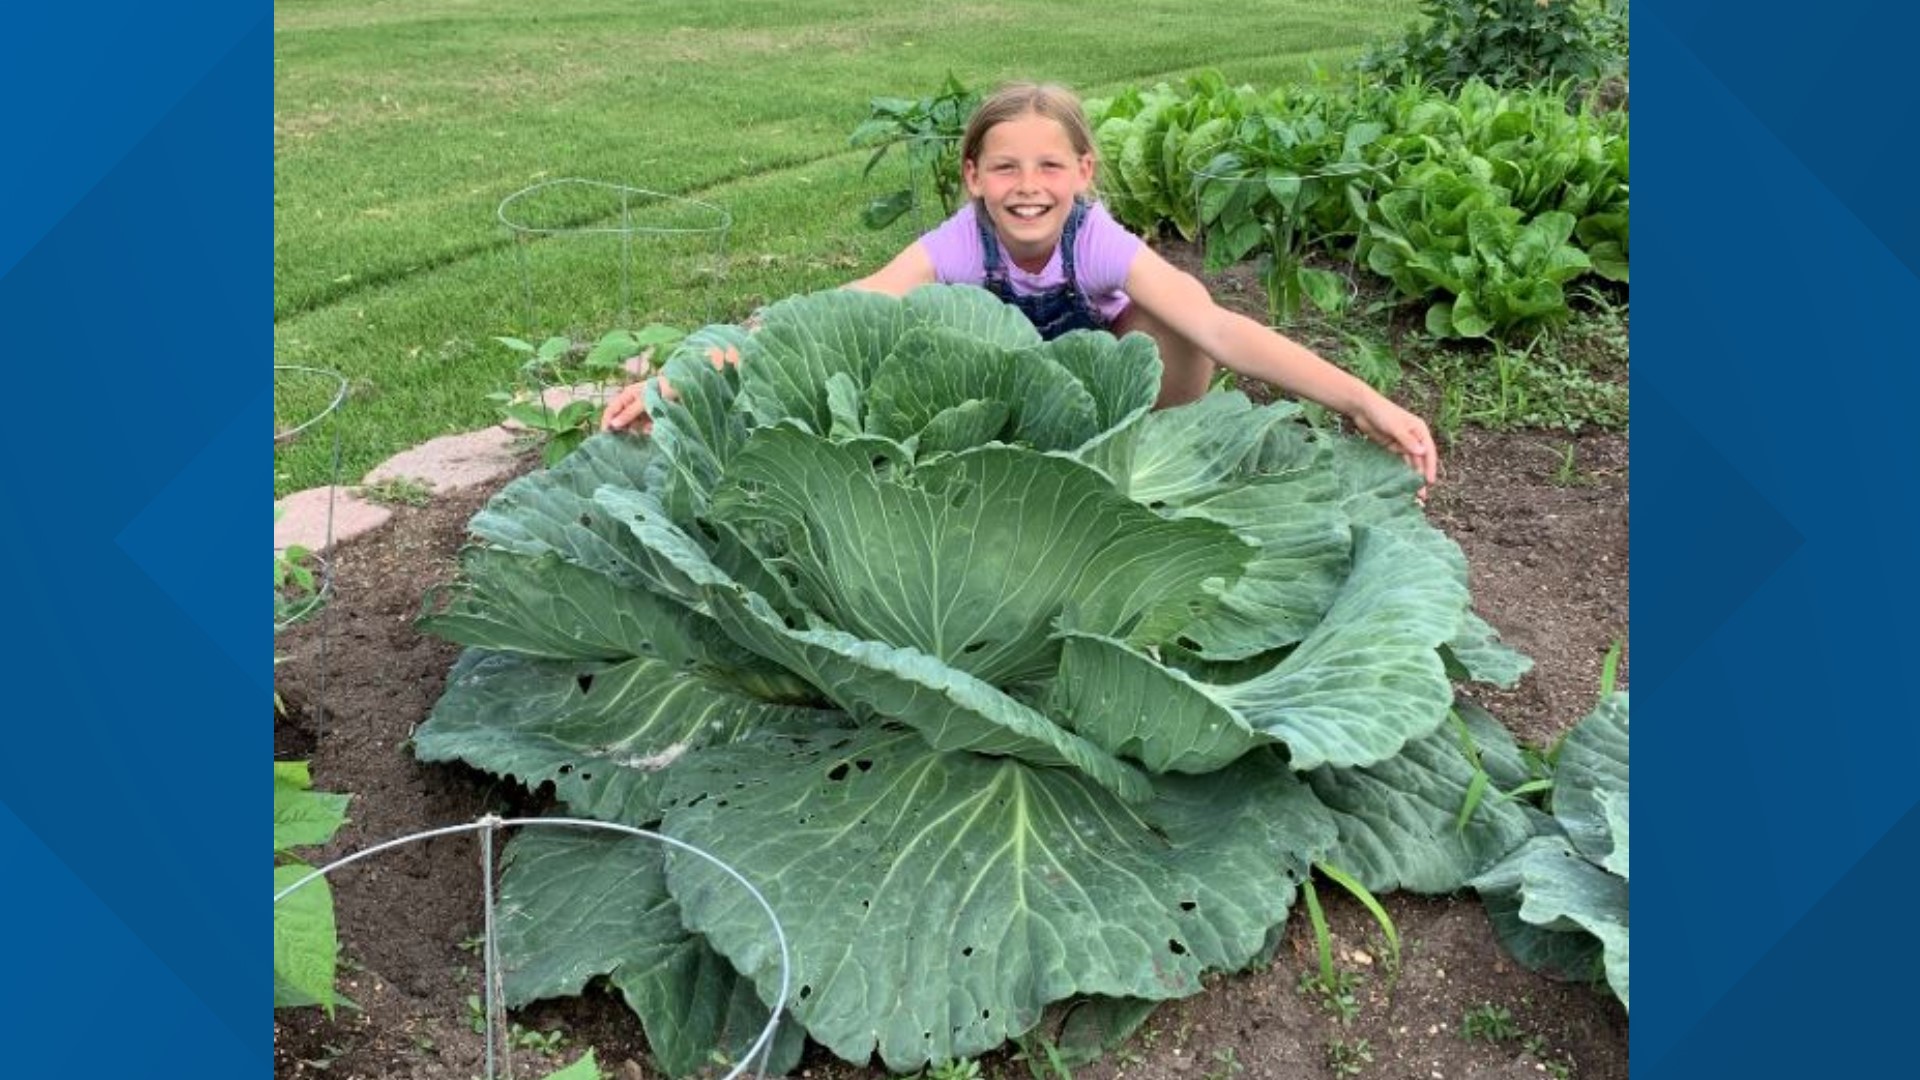 This cabbage had one big price on its head!